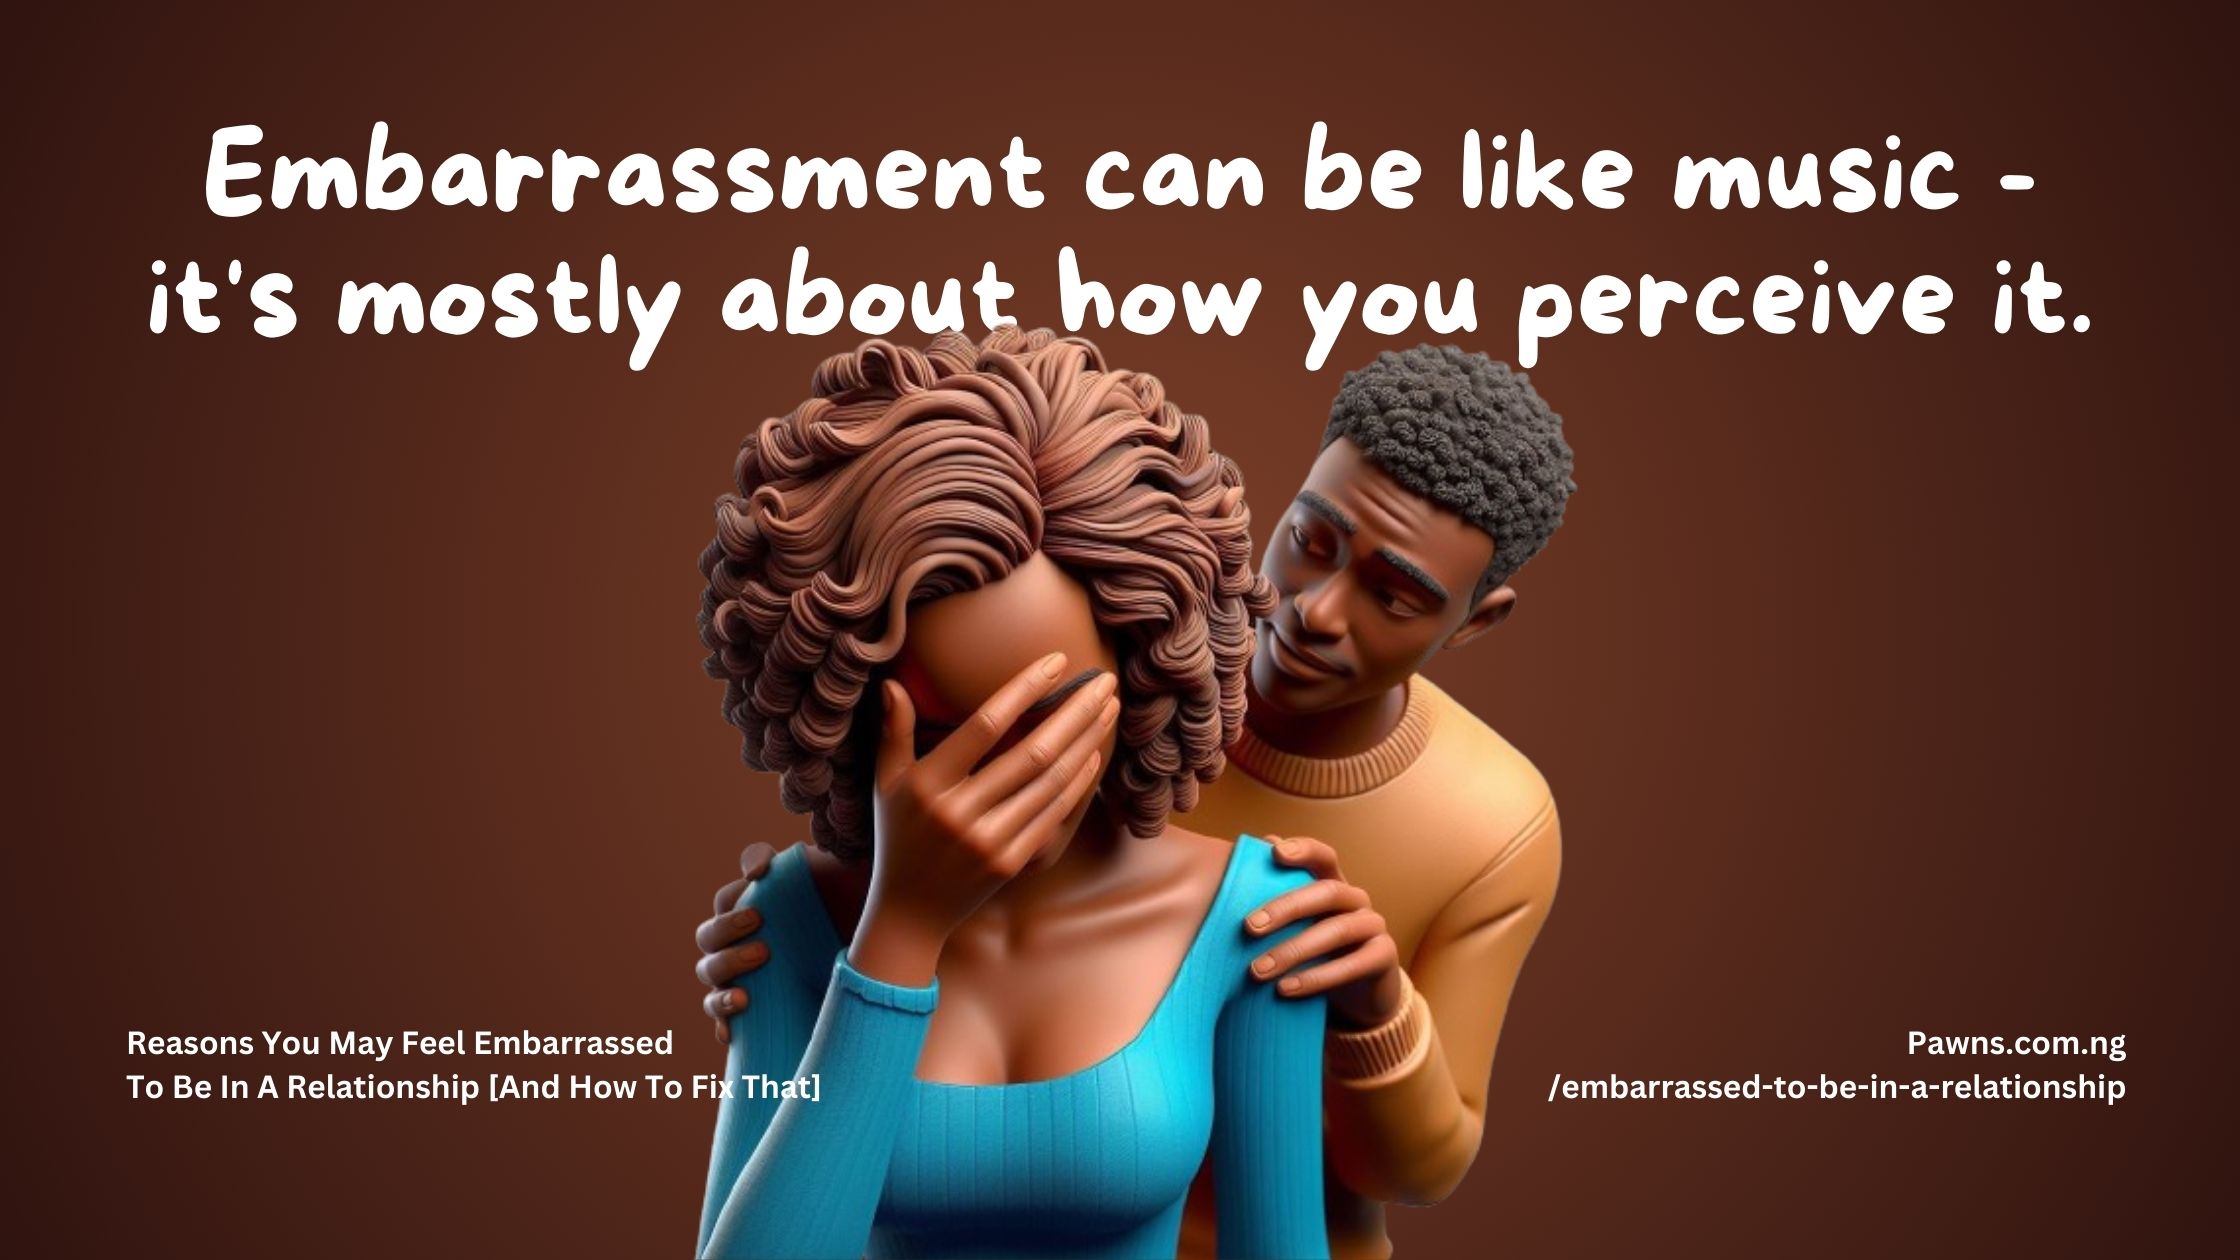 Embarrassment can be like music it's mostly about how you perceive it. Reasons You May Feel Embarrassed To Be In A Relationship And How To Fix That